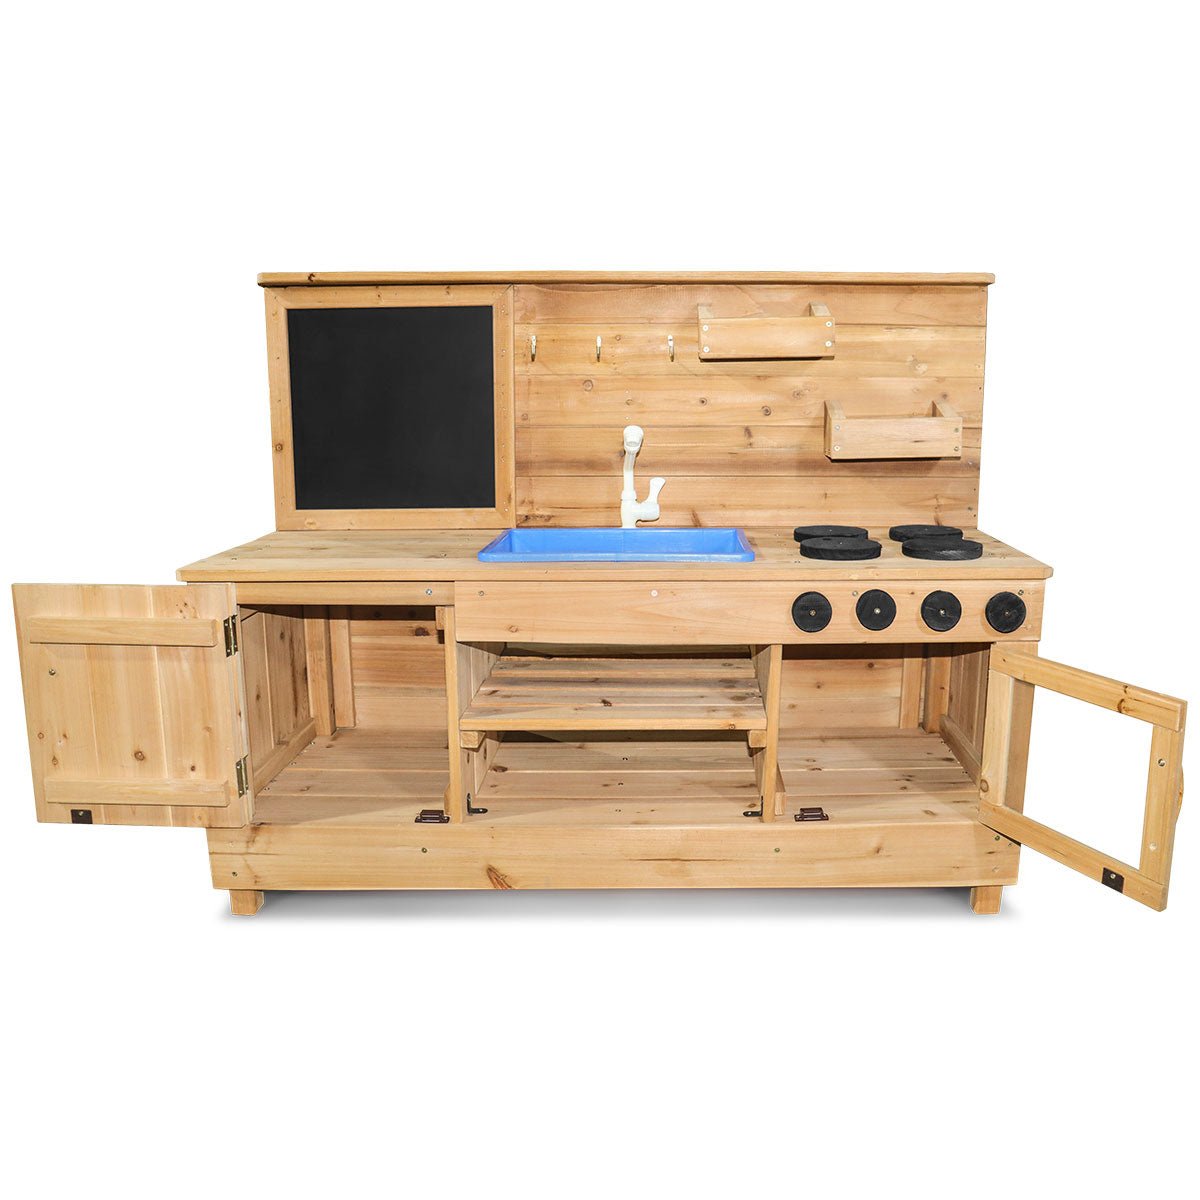 Roma V2 Outdoor Play Kitchen: Encouraging Kids Culinary Exploration